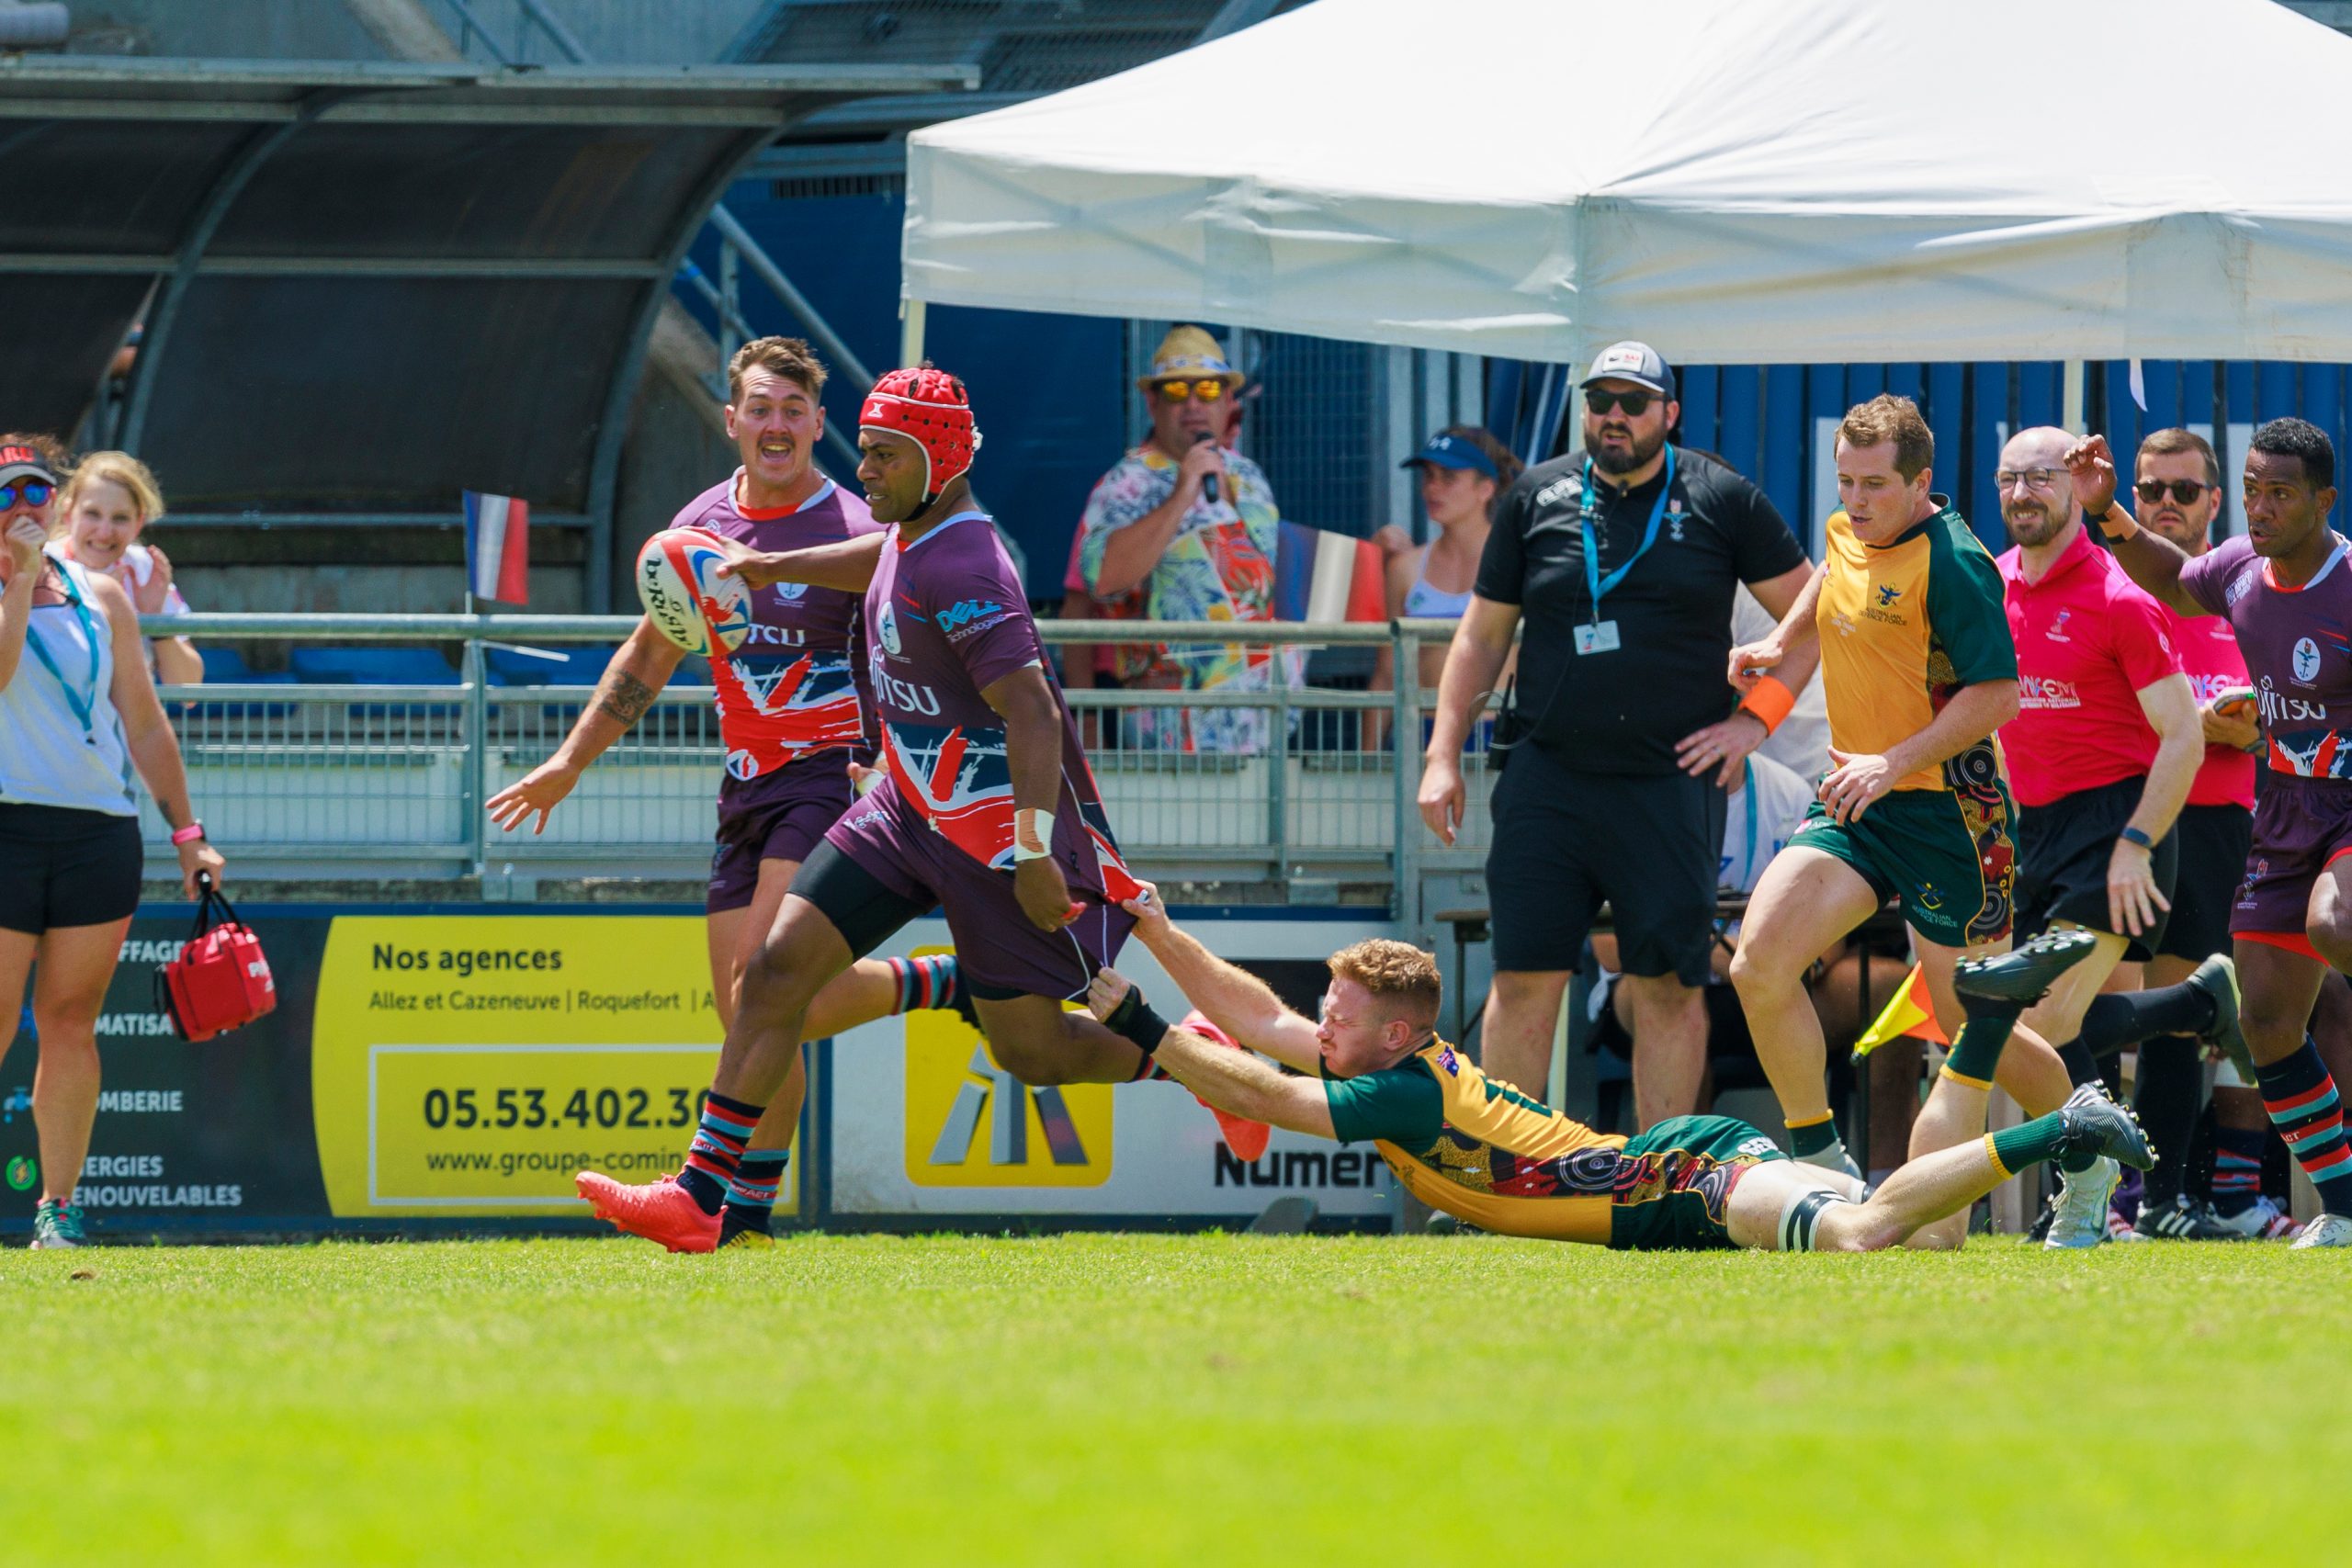 men's 7s. UKAF Player breaks though an Australian Defence Force tackle